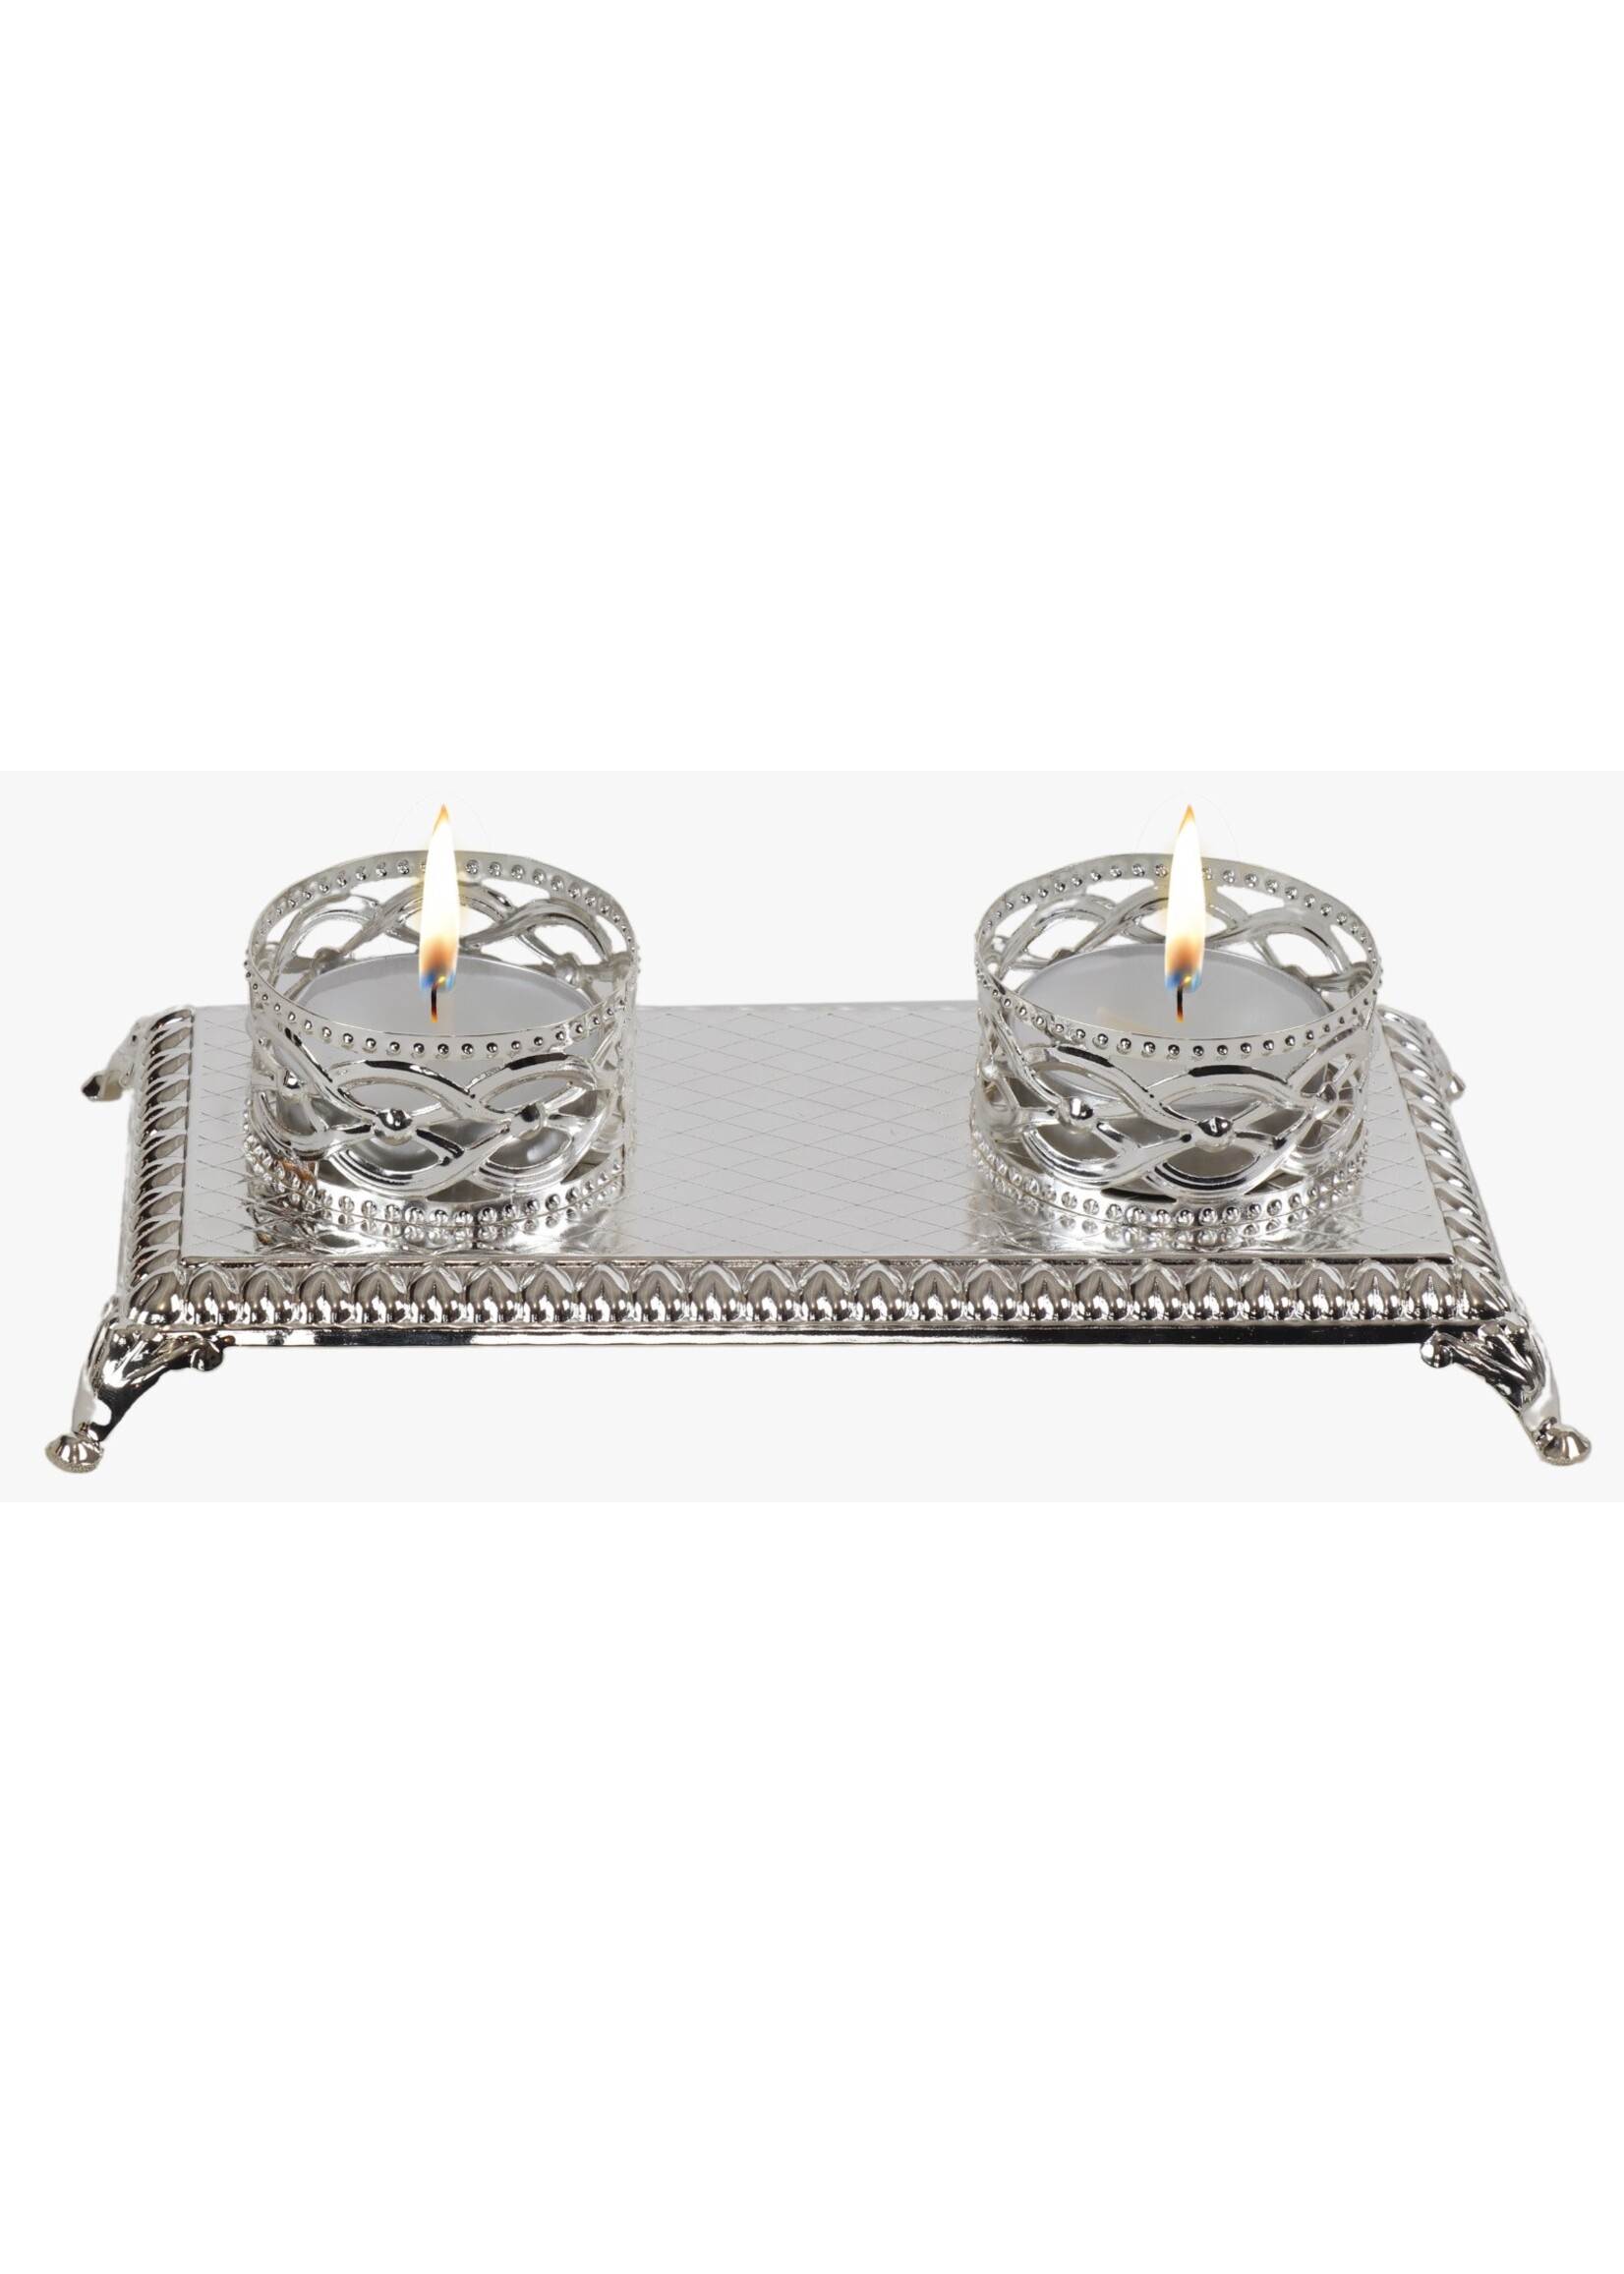 CANDLE HOLDER SILVER - TEALIGHTS